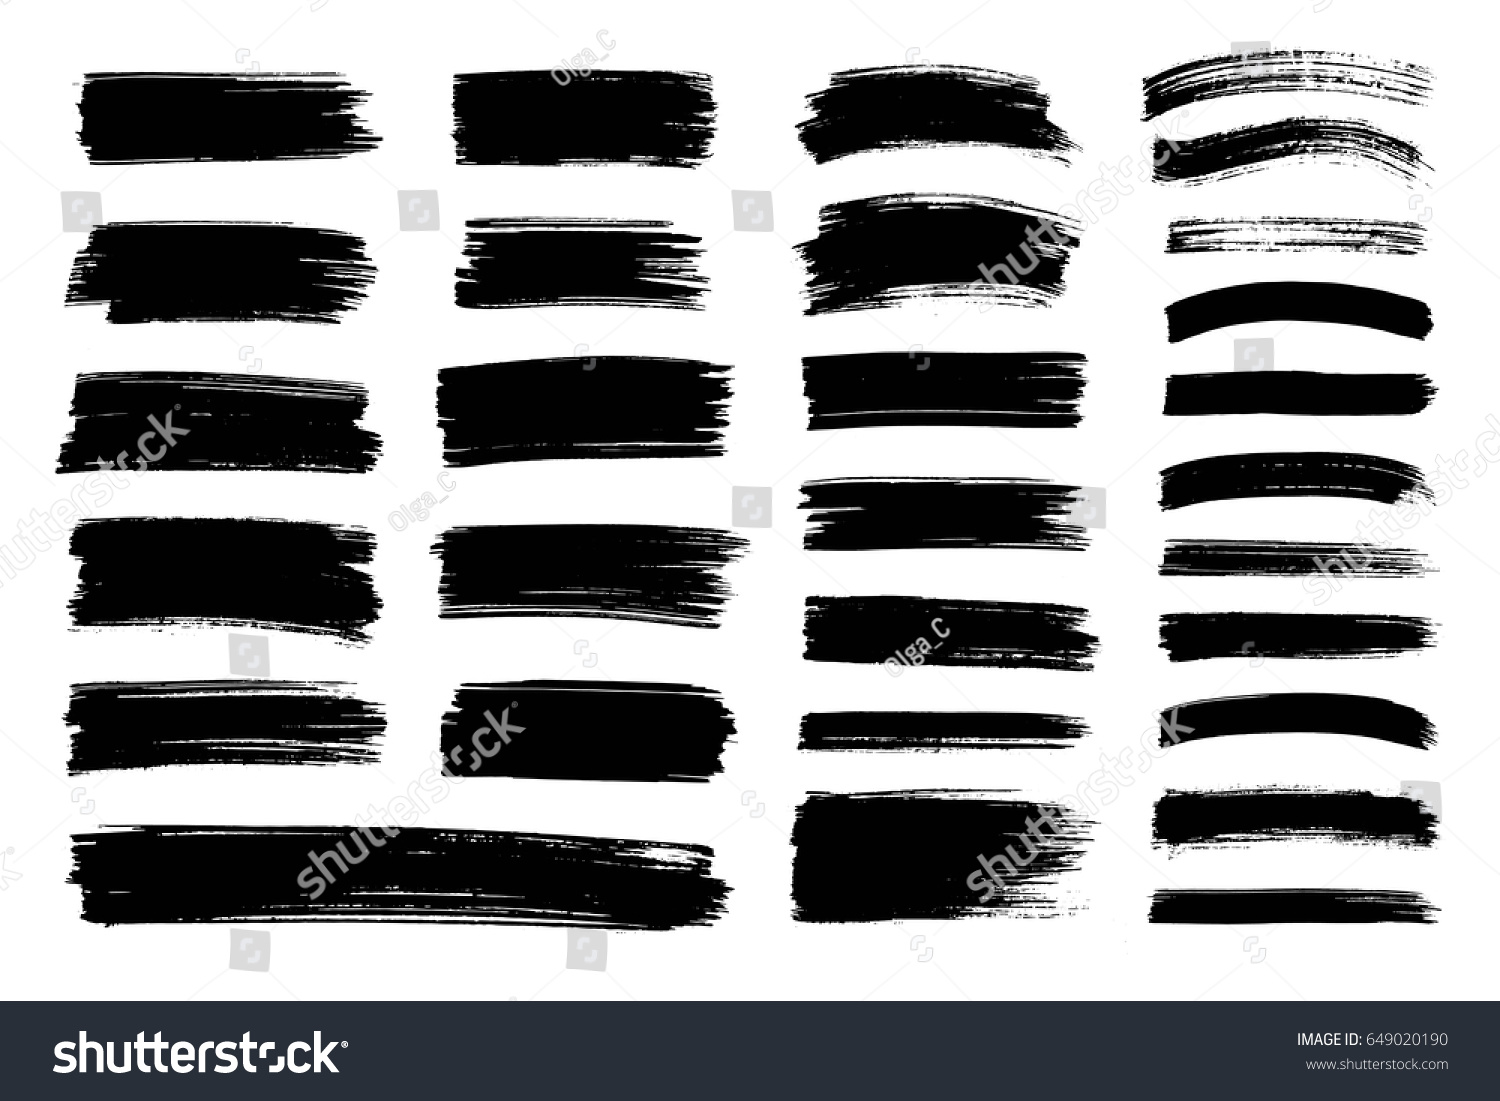 Vector black paint, ink brush stroke, brush, line or texture. Dirty artistic design element, box, frame or background  for text.  #649020190